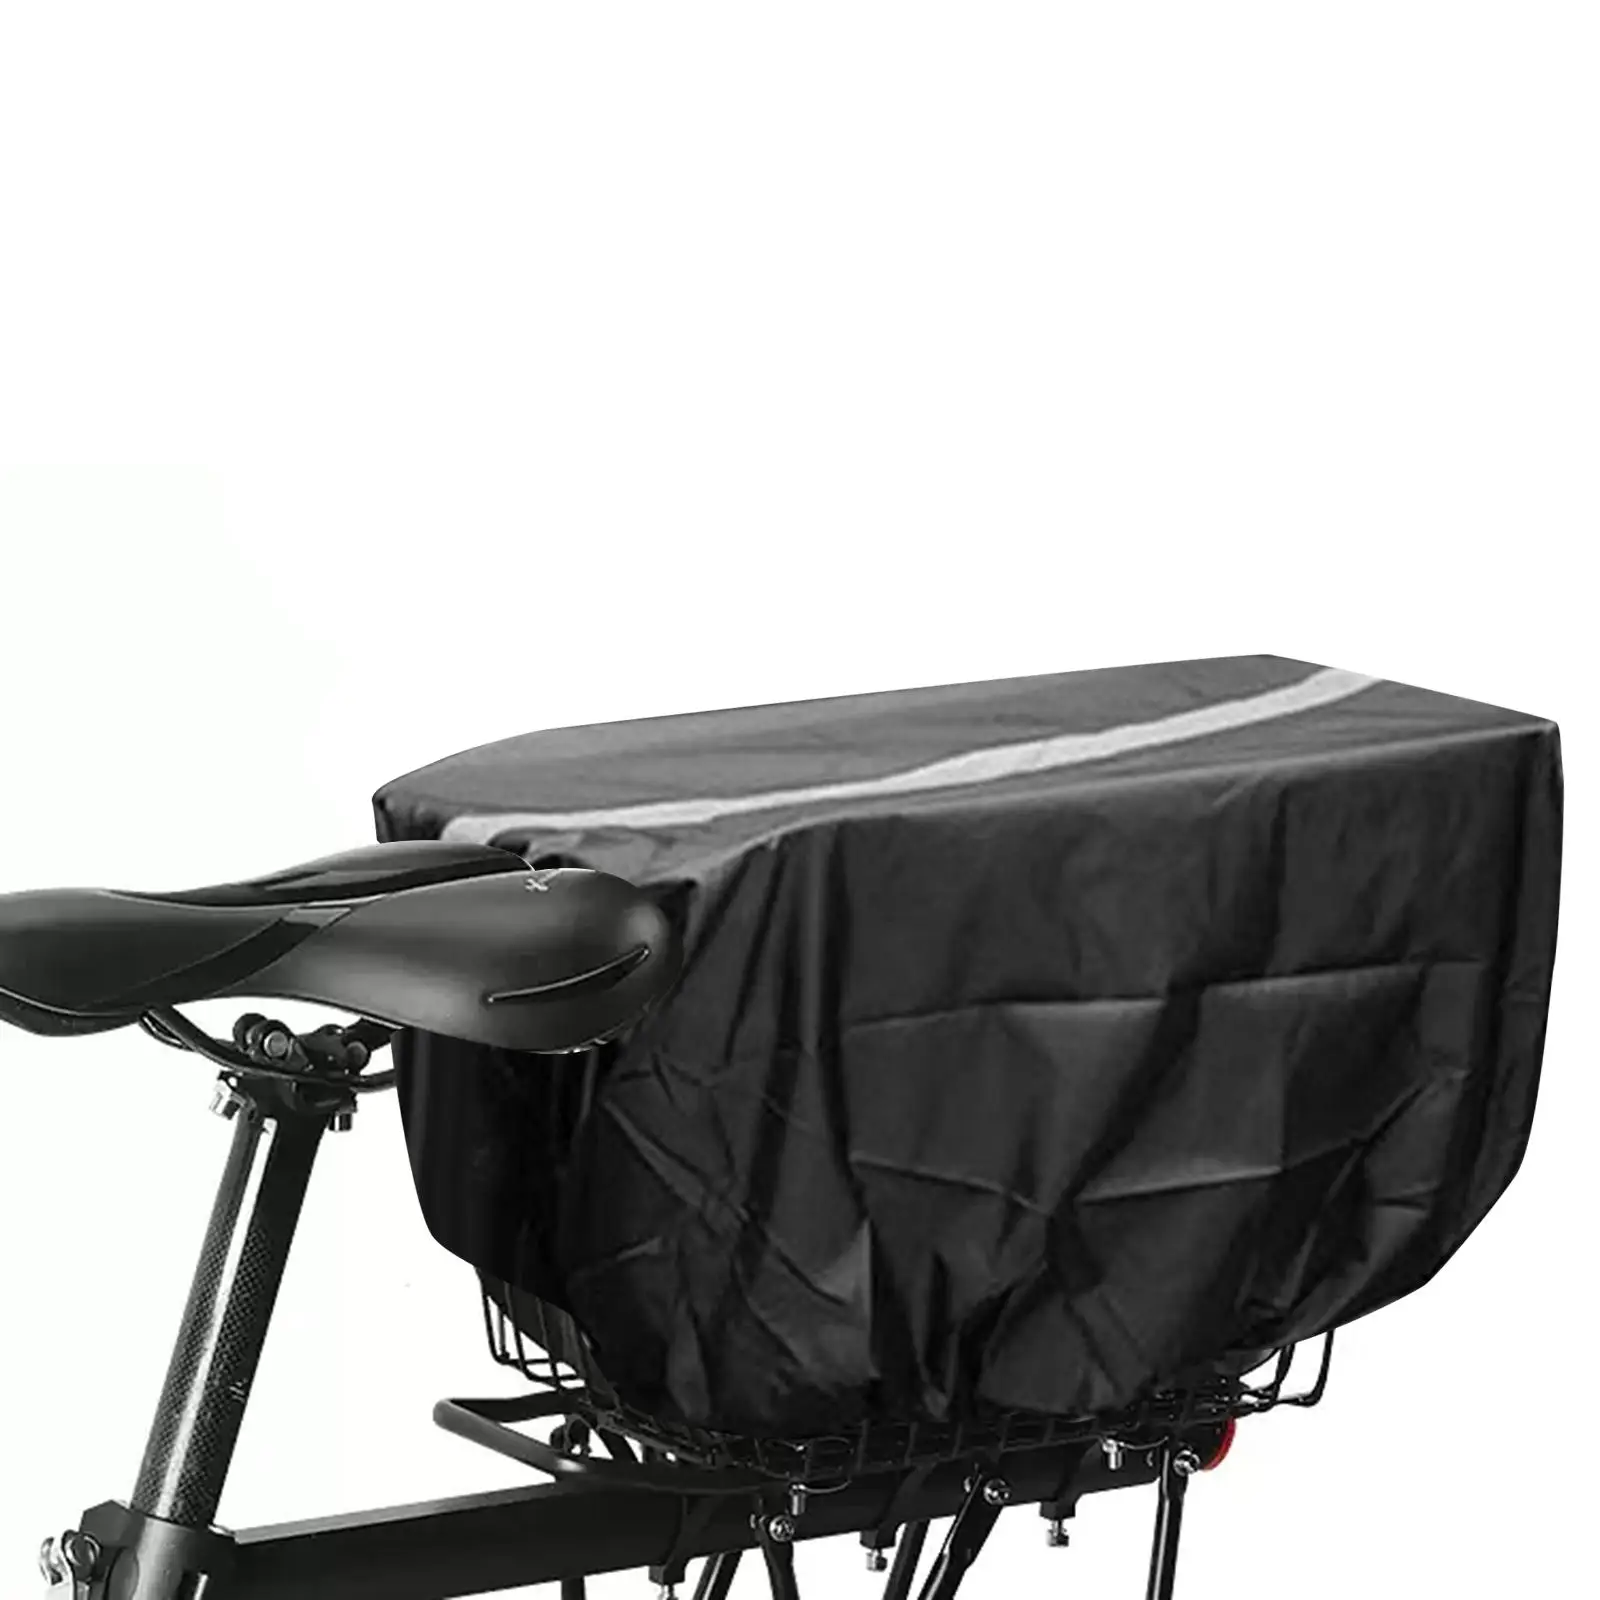 Bike Basket Cover Bike Basket Liner Black Water Resistant Bicycle Basket Rain Cover for Tricycles Electric Bikes Accessories